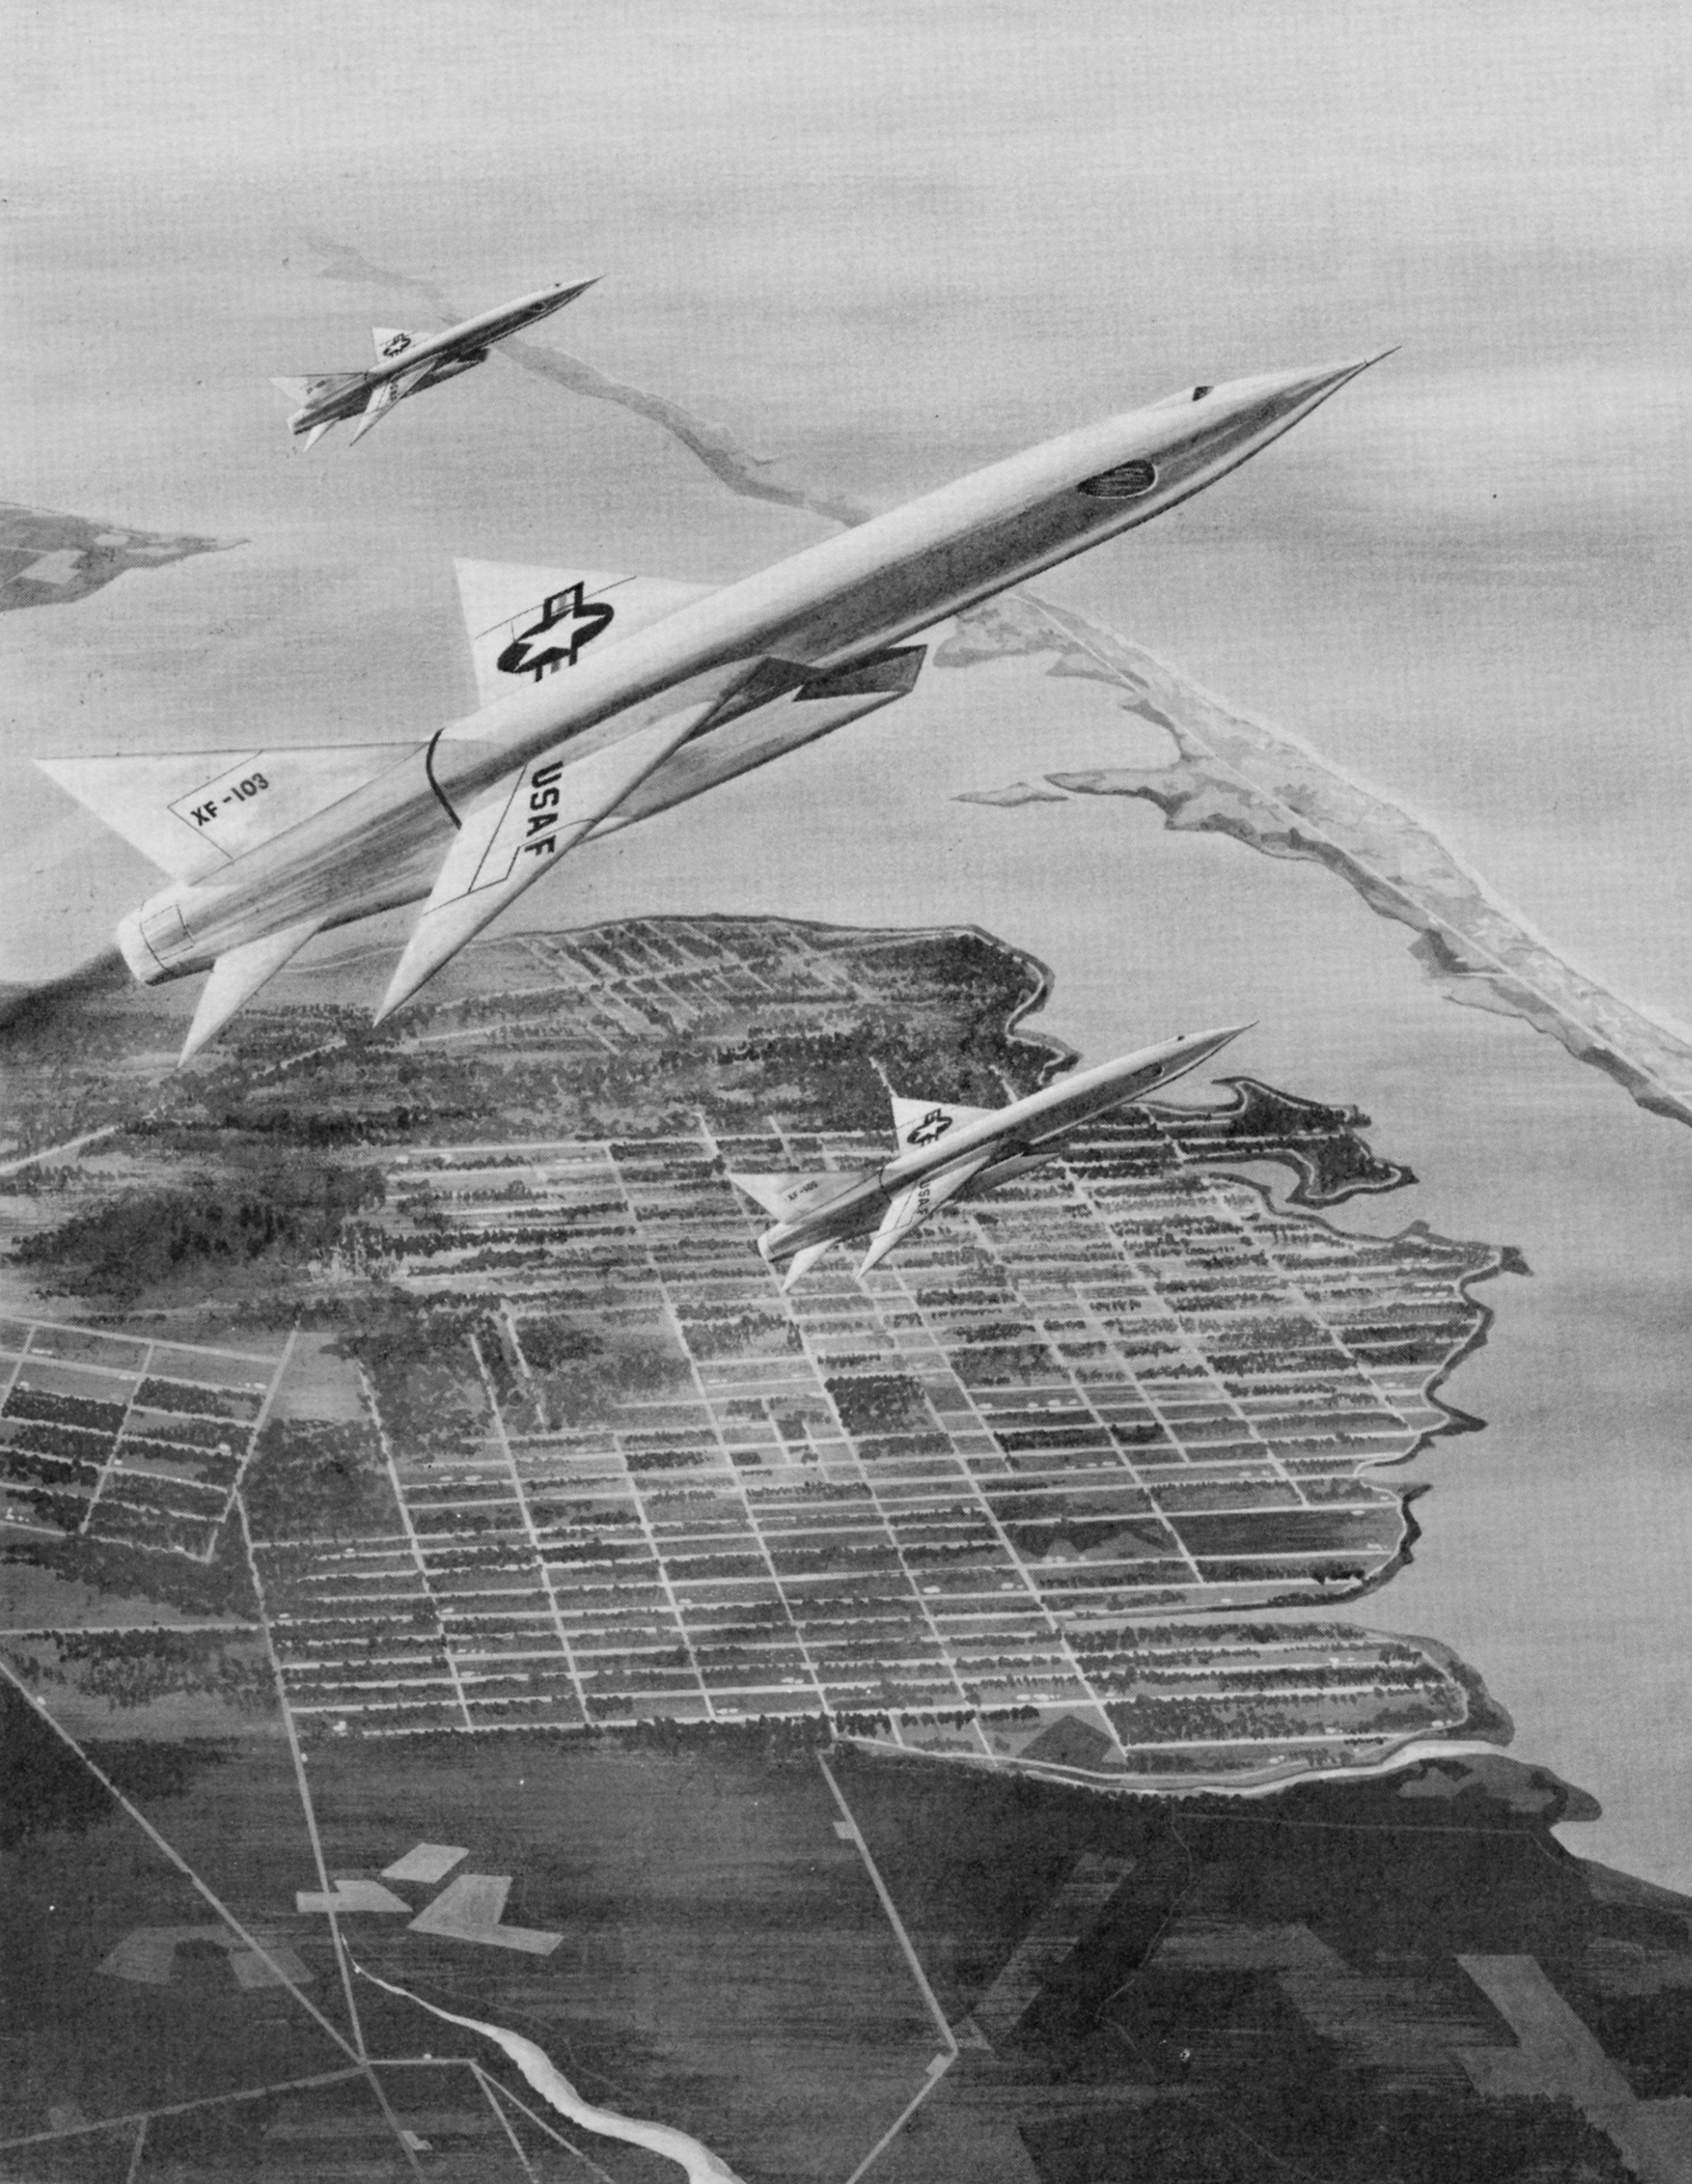 Artist concept of three Republic F-103 aircraft departing their base to perform an intercept mission off of the United States coast. (National Archives, St. Louis)